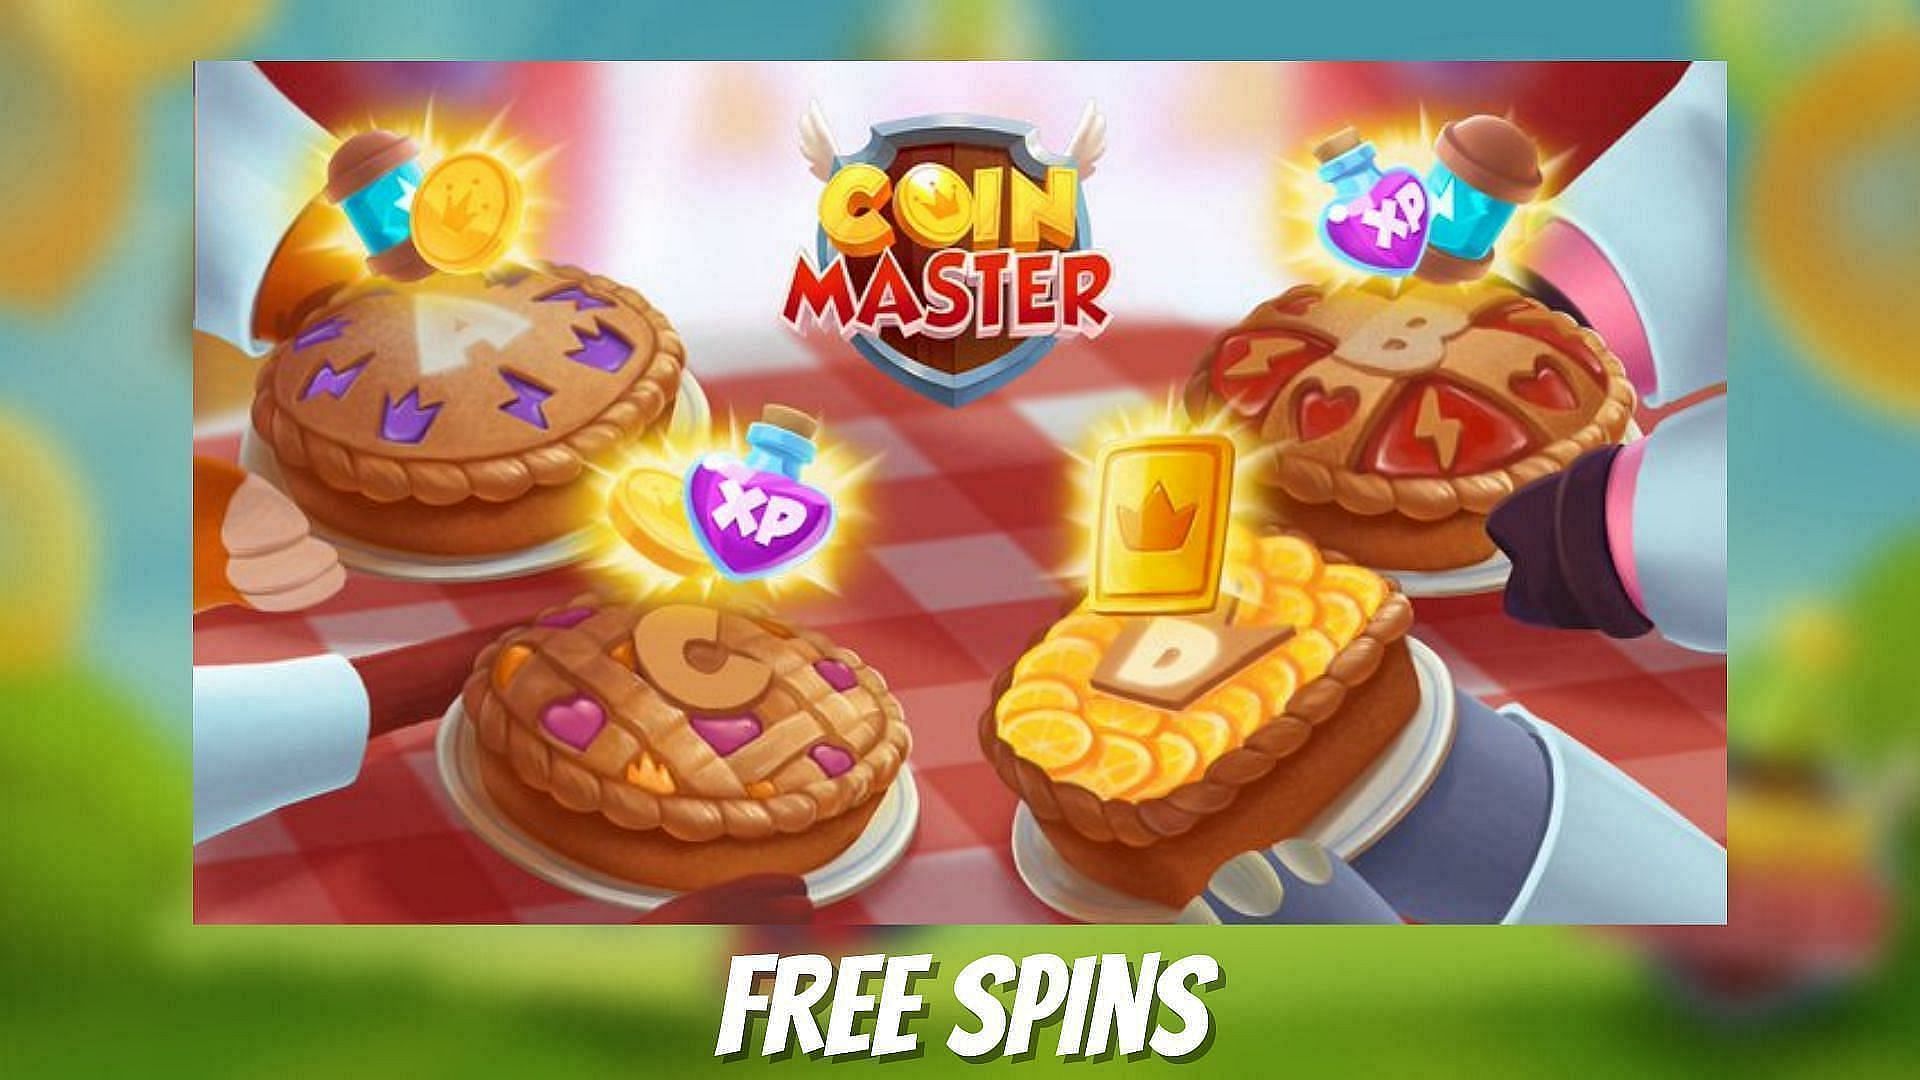 1000 free spins on coin master